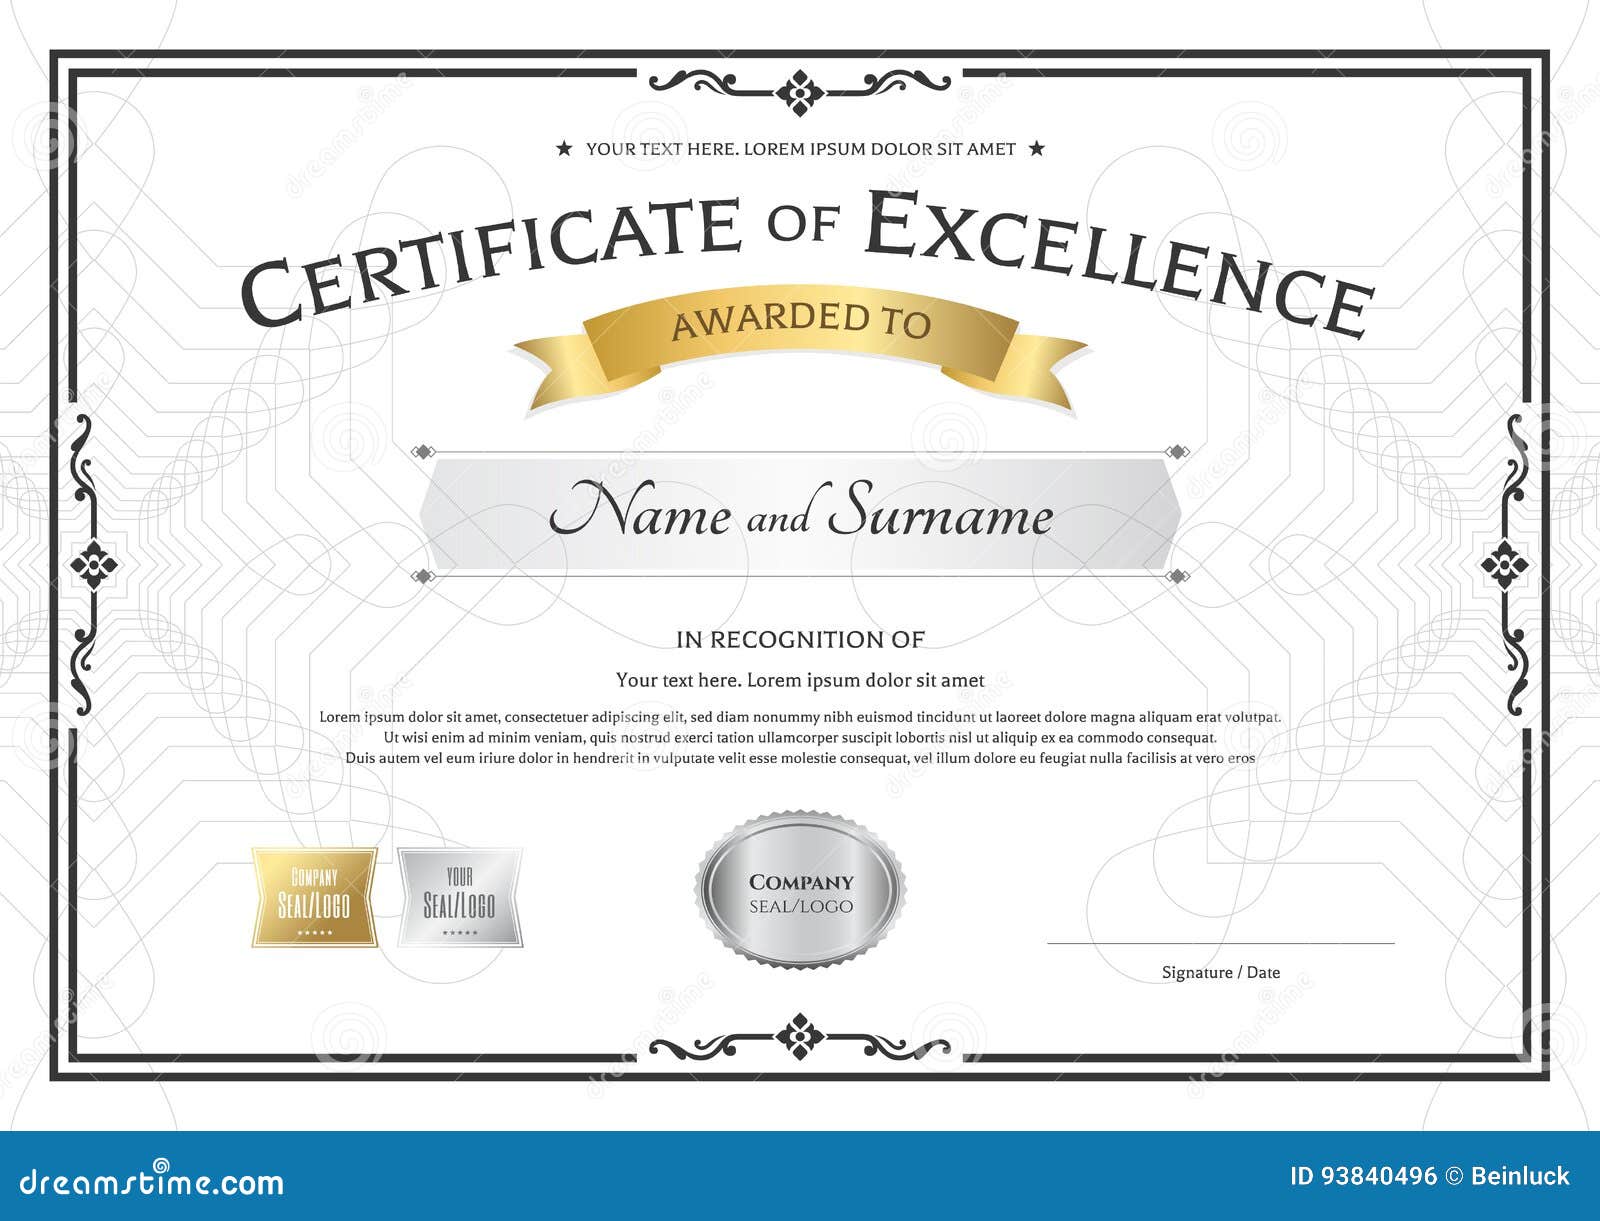 Certificate of Excellence Template with Gold Award Ribbon on Abs With Regard To Award Of Excellence Certificate Template